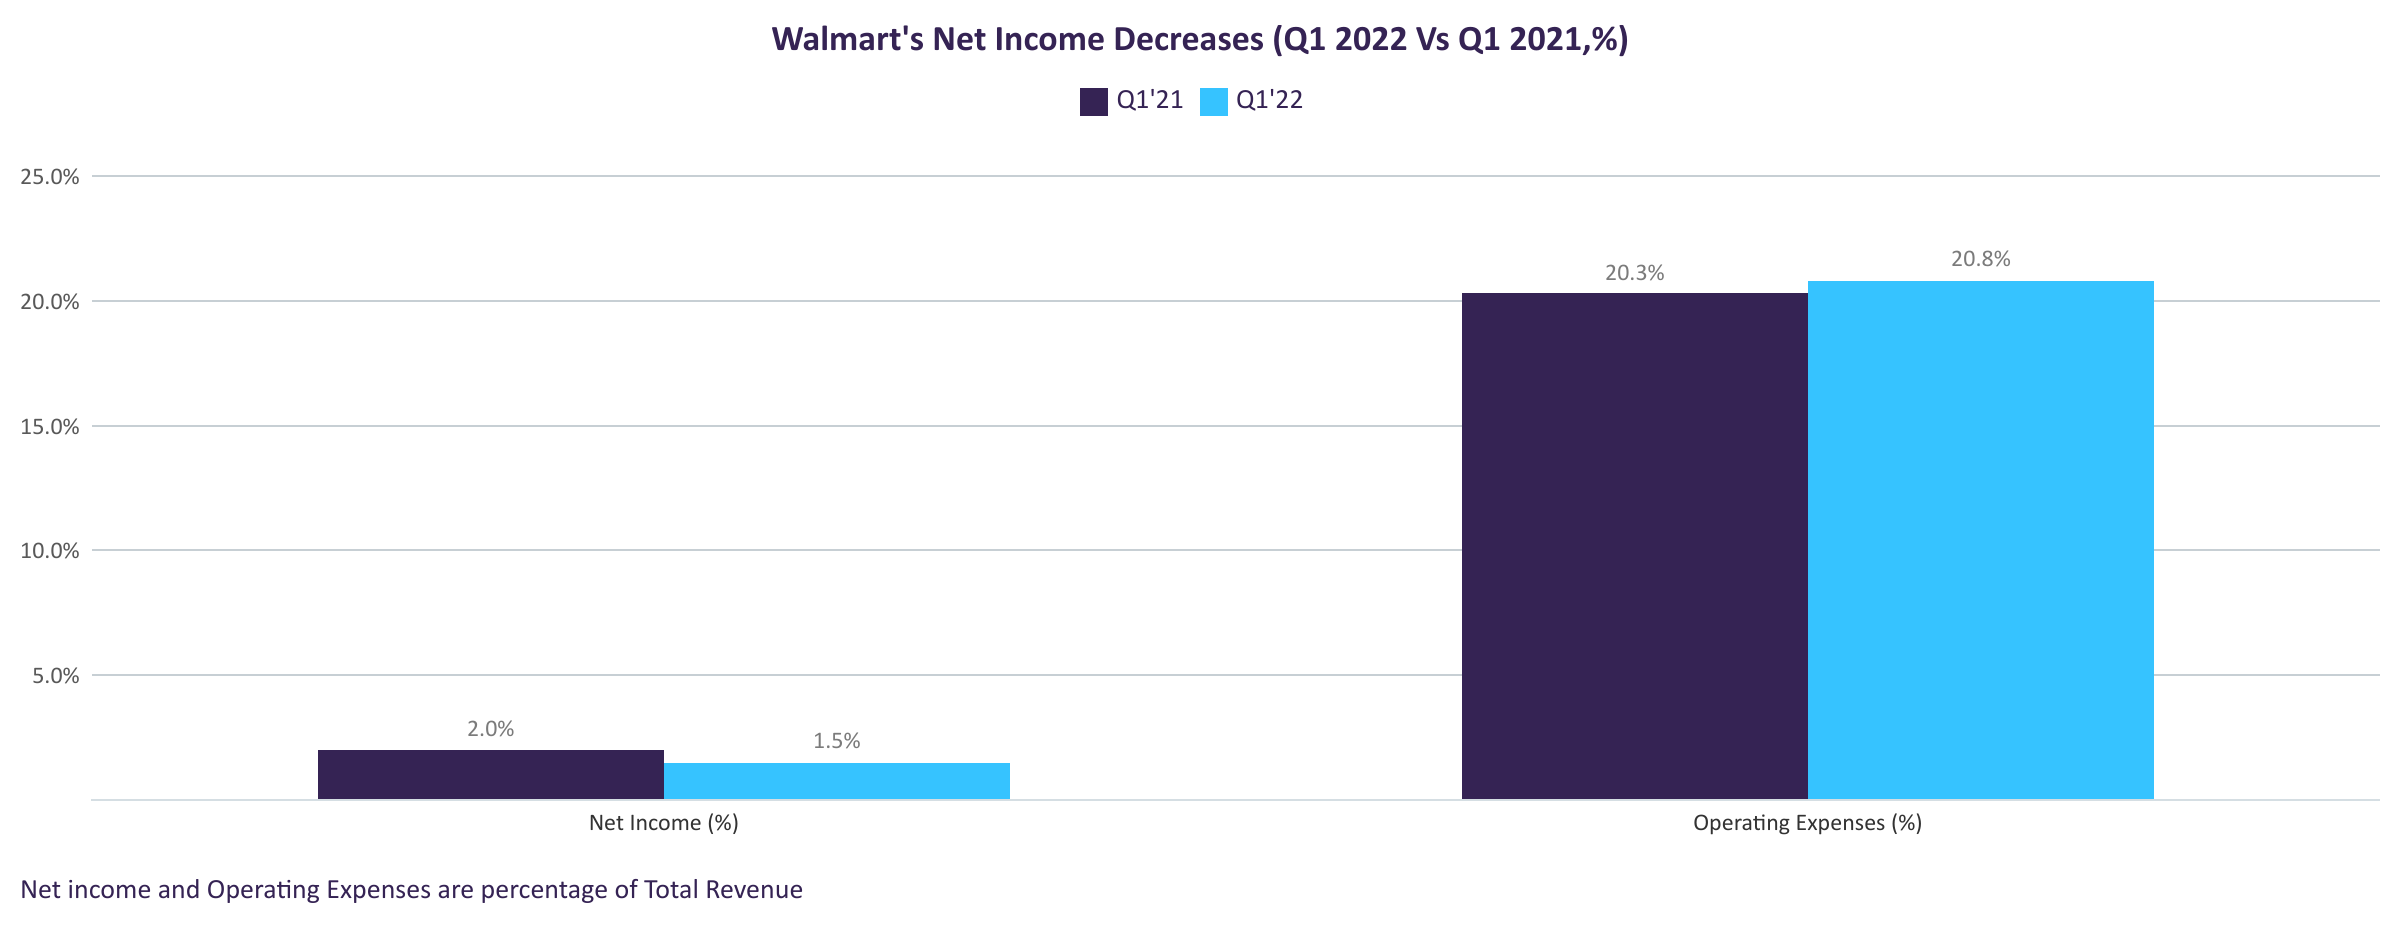 Food and Online Sales Surge Powers Walmart's Profit and Earnings